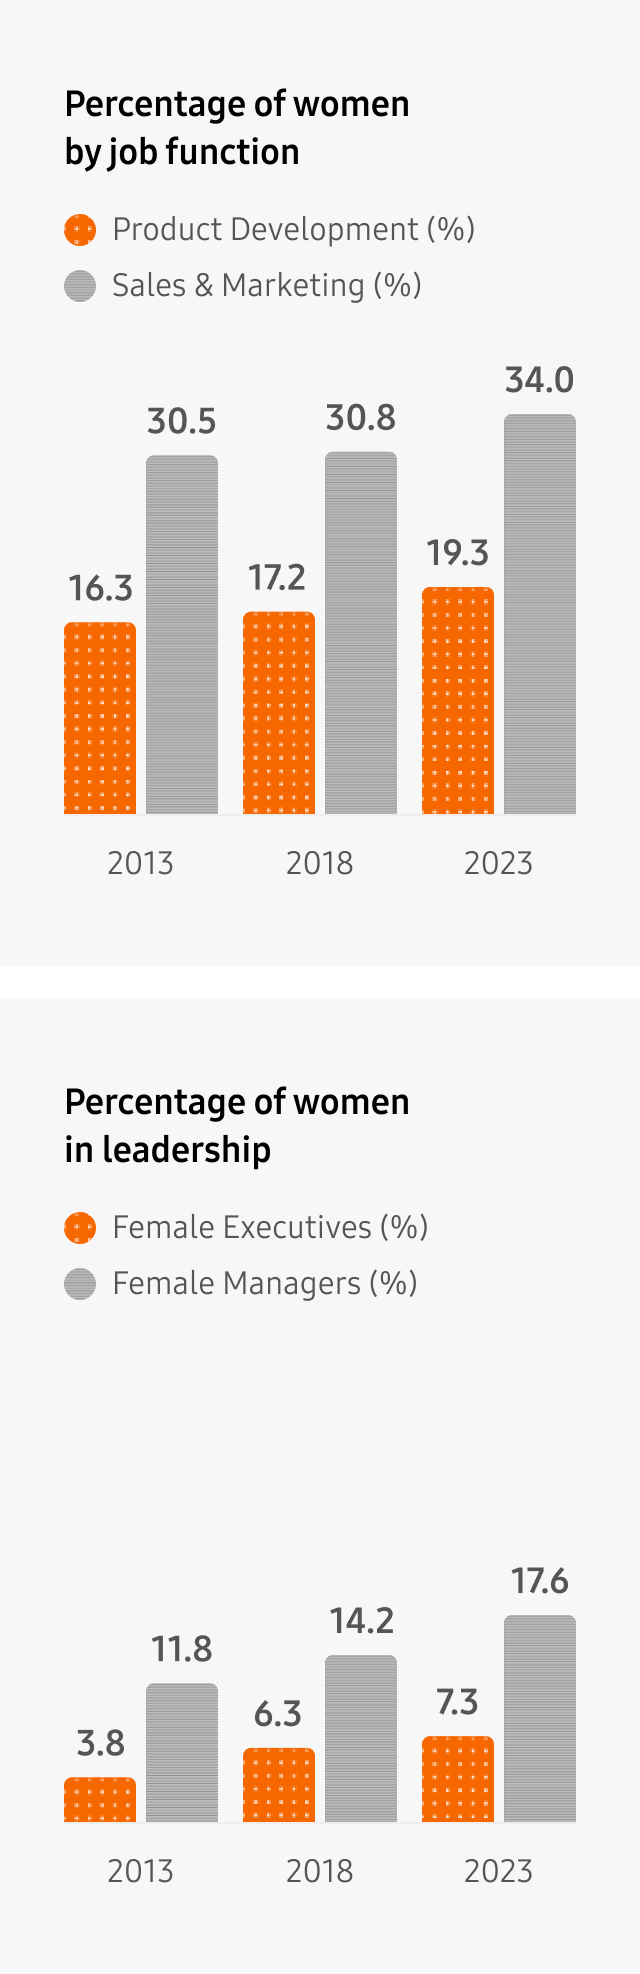 Percentage of women by job function: 2013 - Product Development: 16.3% Sale and marketing: 30.5%, 2018 - Product Development: 17.7% Sale and marketing: 30.8%, 2023 - Product Development: 19.2% Sale and marketing 34%, Percentage of women in leadership: 2013 - Executive: 3.8% Manager: 11.8%, 2018 - Executive: 6.3% Manager: 14.2%, 2023 - Executive: 7.3% Manager 17.6%